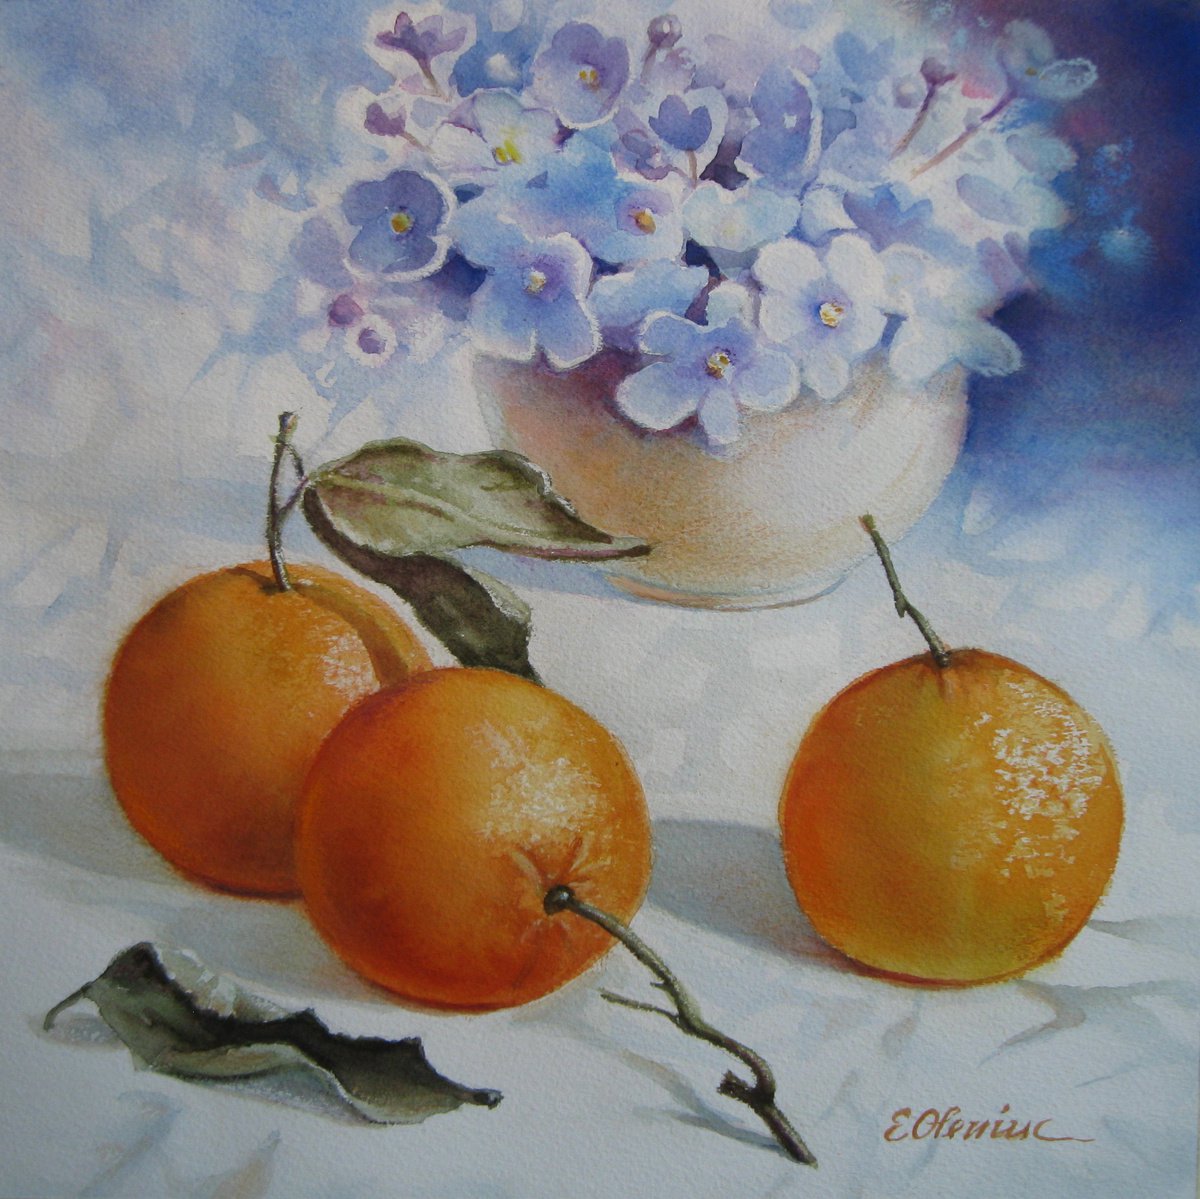 Flowers and fruits by Elena Oleniuc